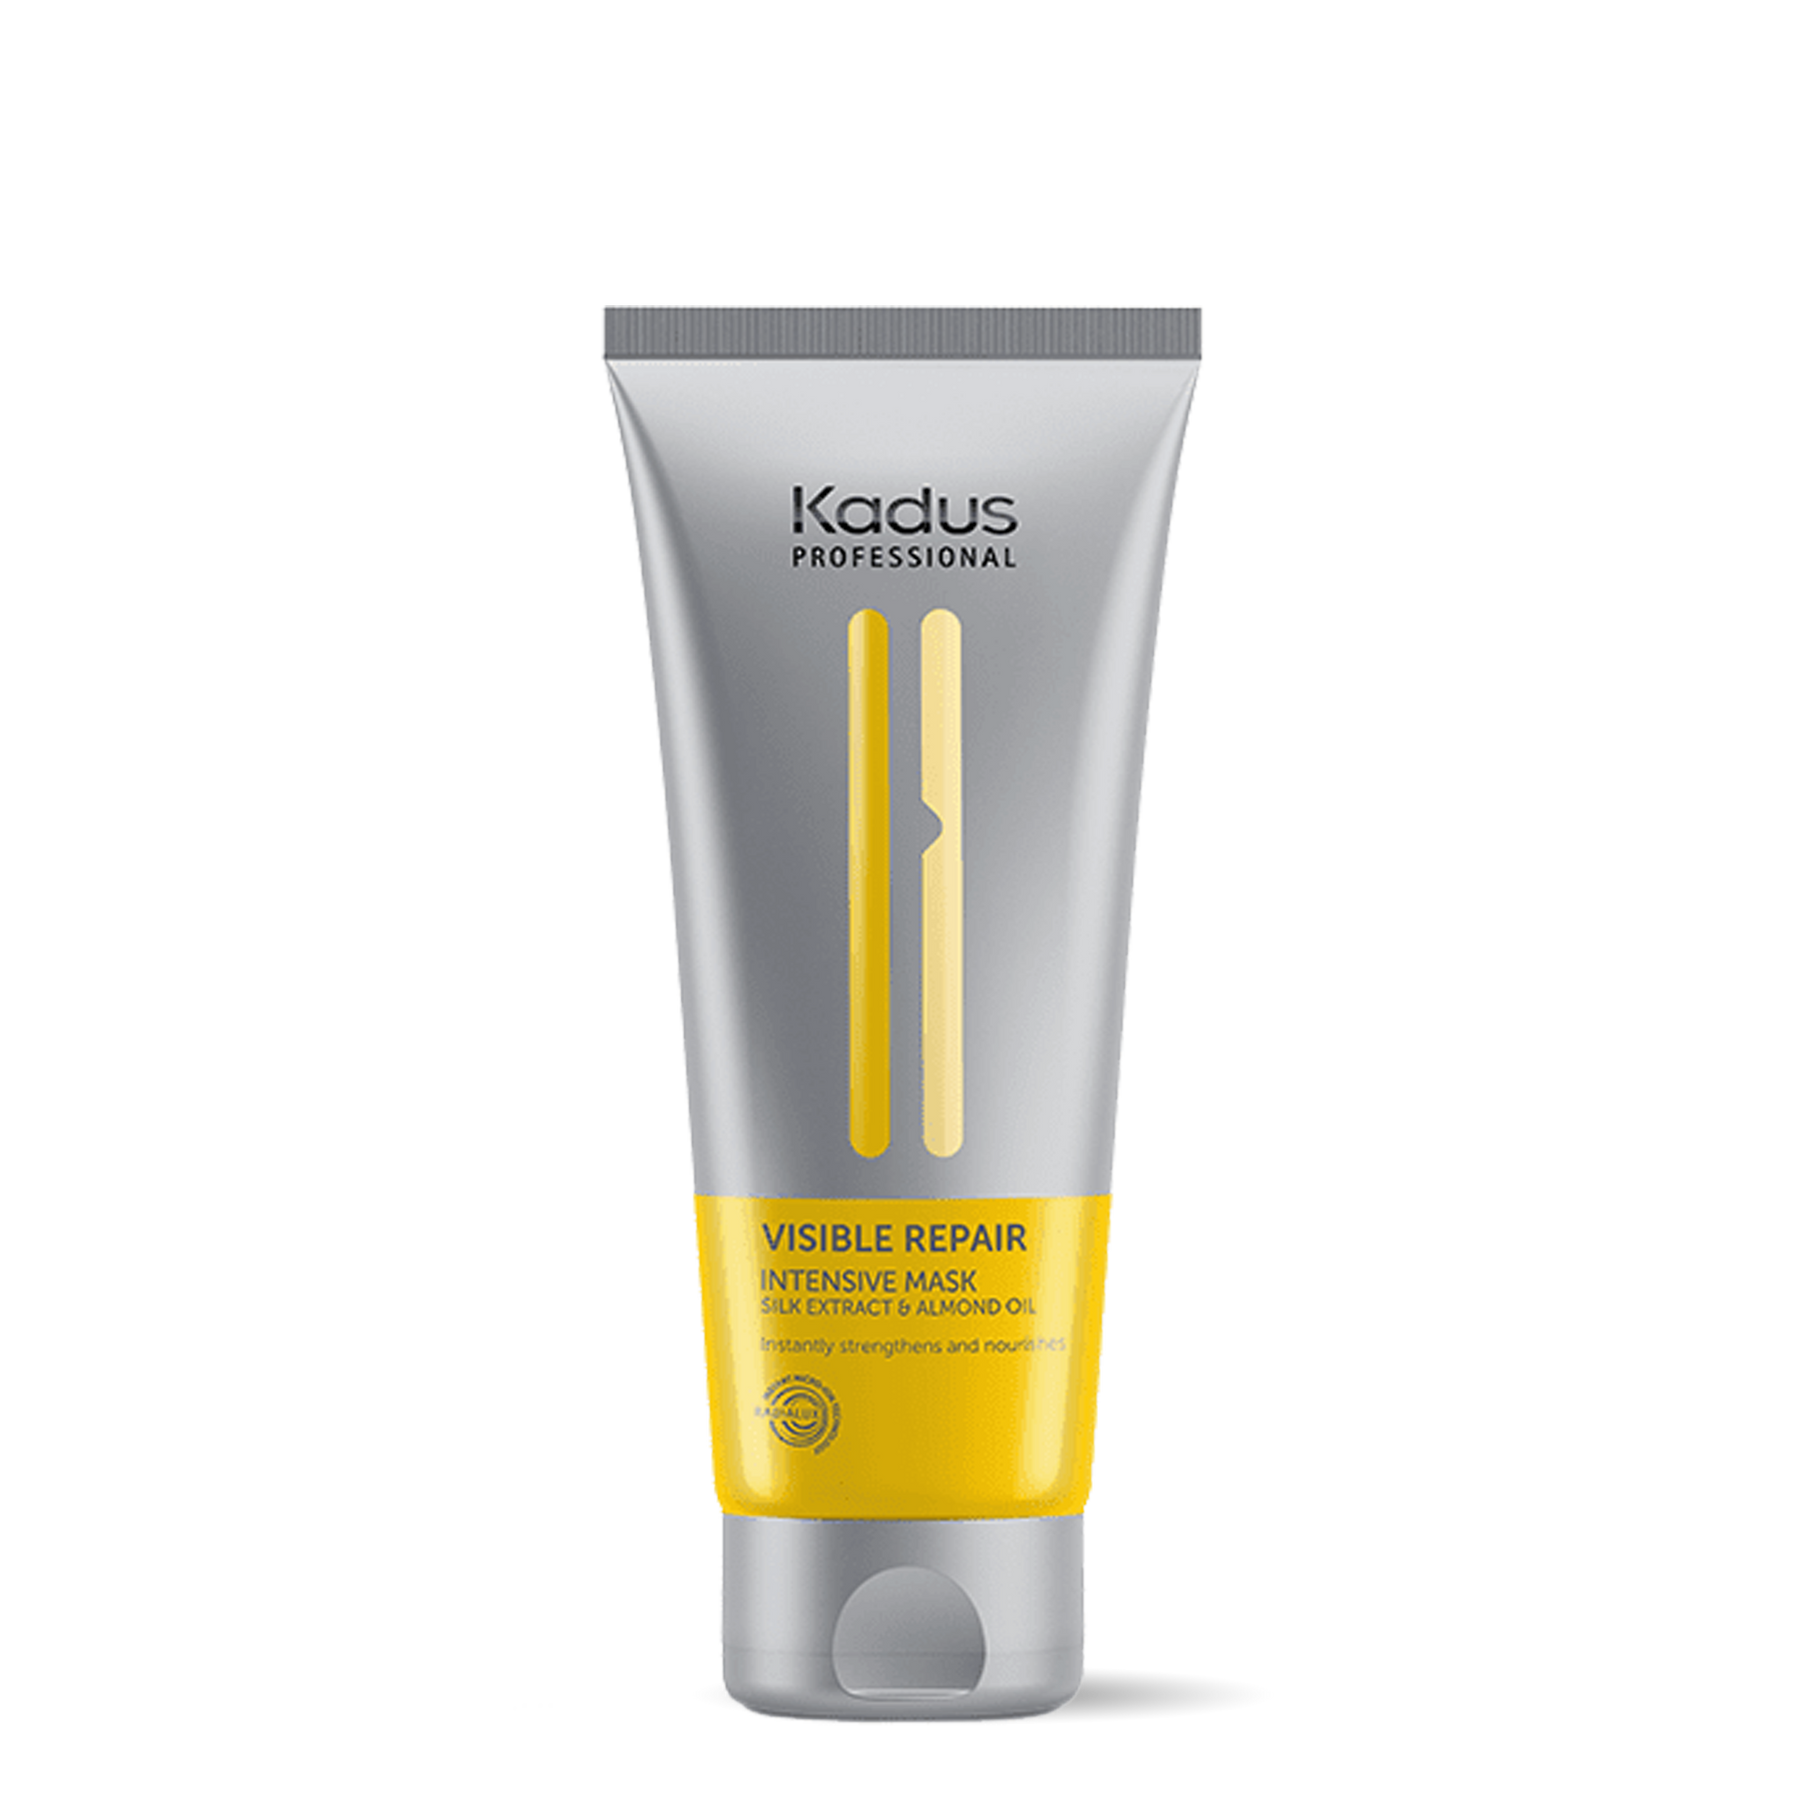 Kadus Visible Repair Intensive Mask 200ml - by Kadus Professionals |ProCare Outlet|